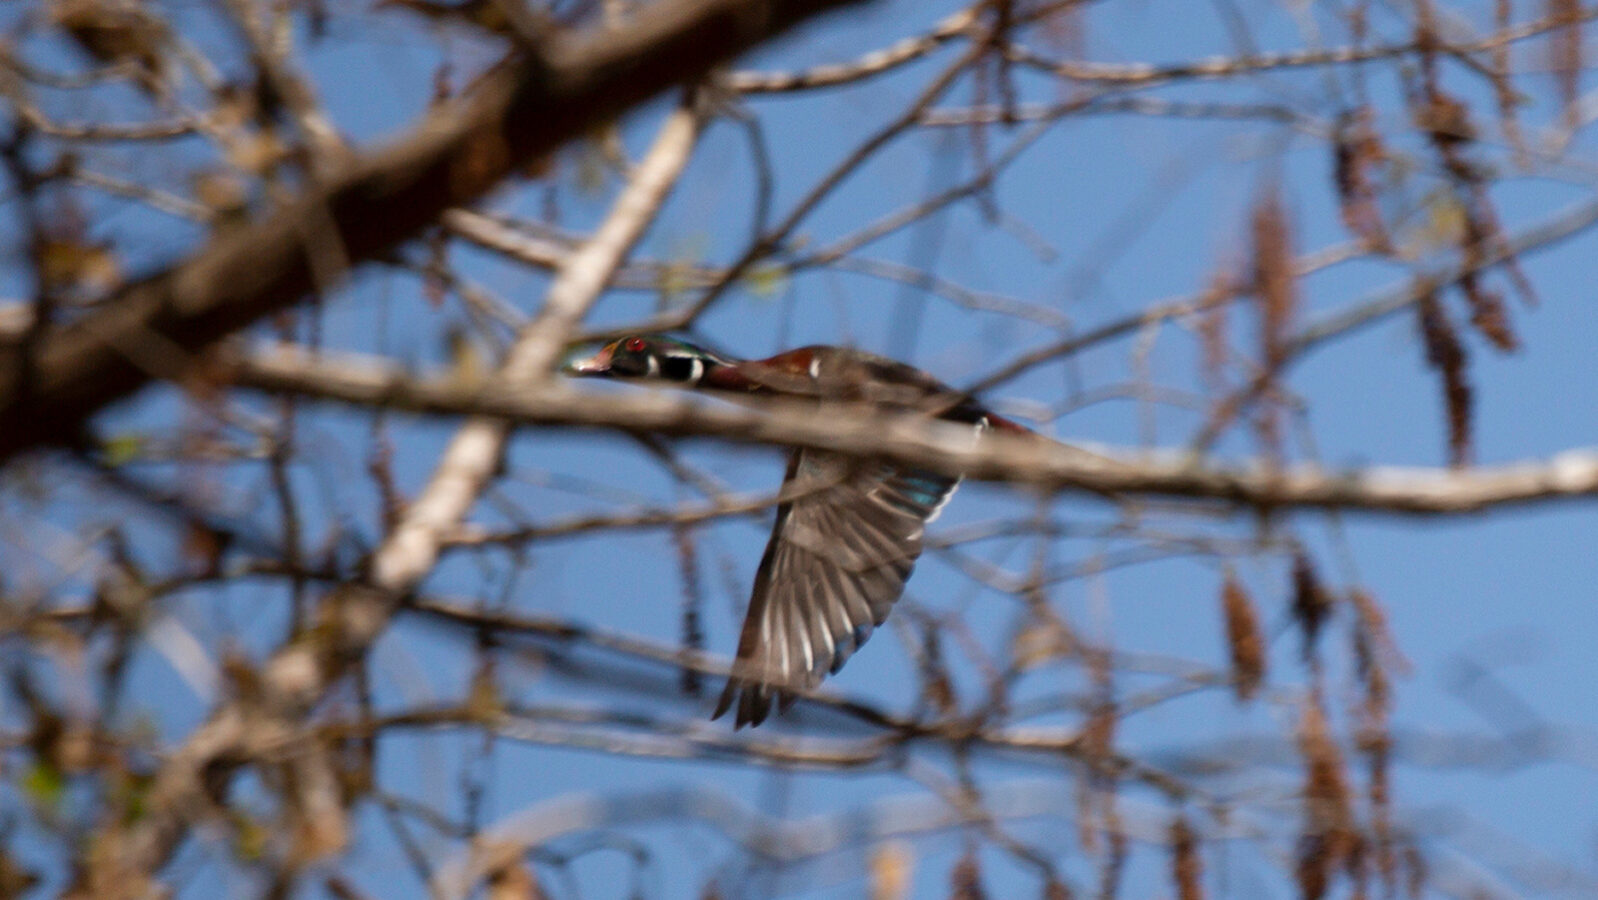 Male wood duck flying past a tree limb